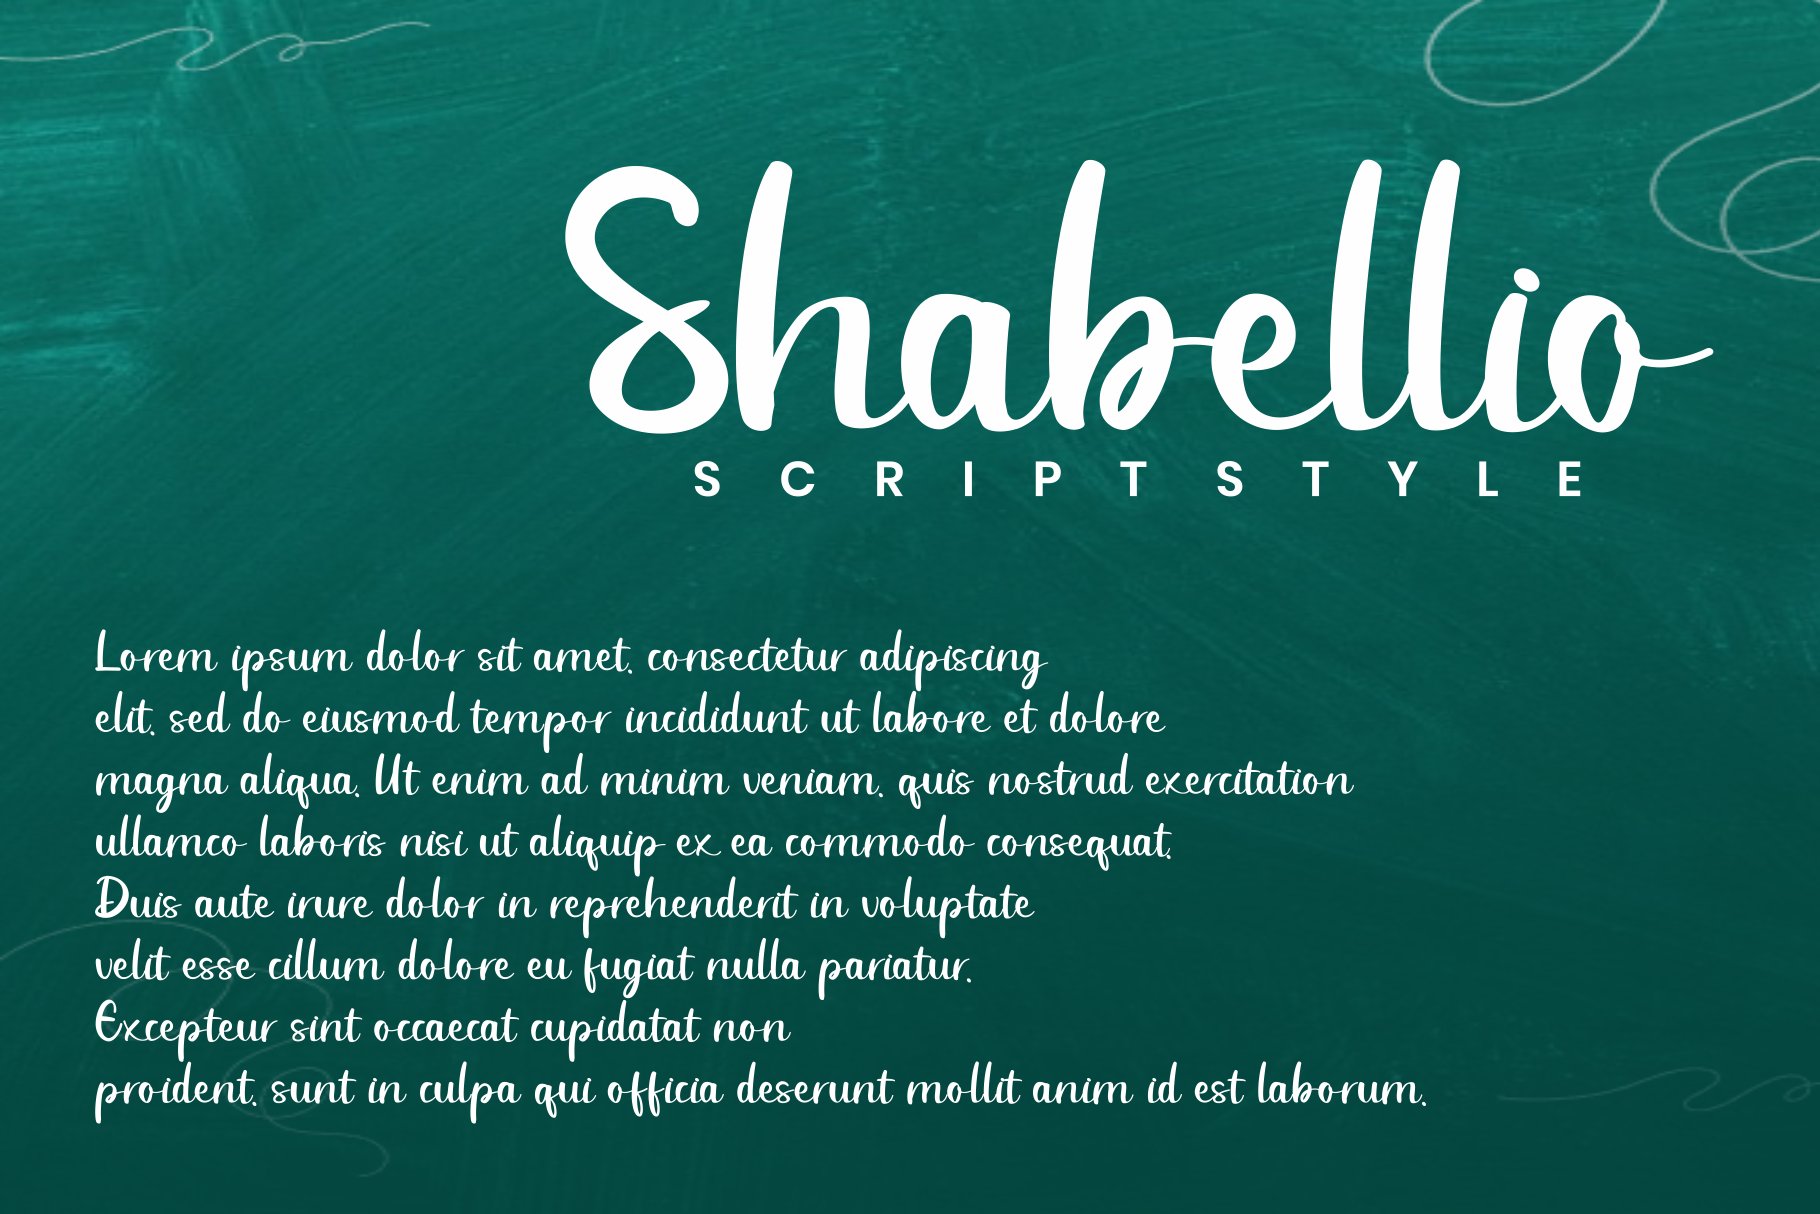 A green chalkboard with the words shabella script style.